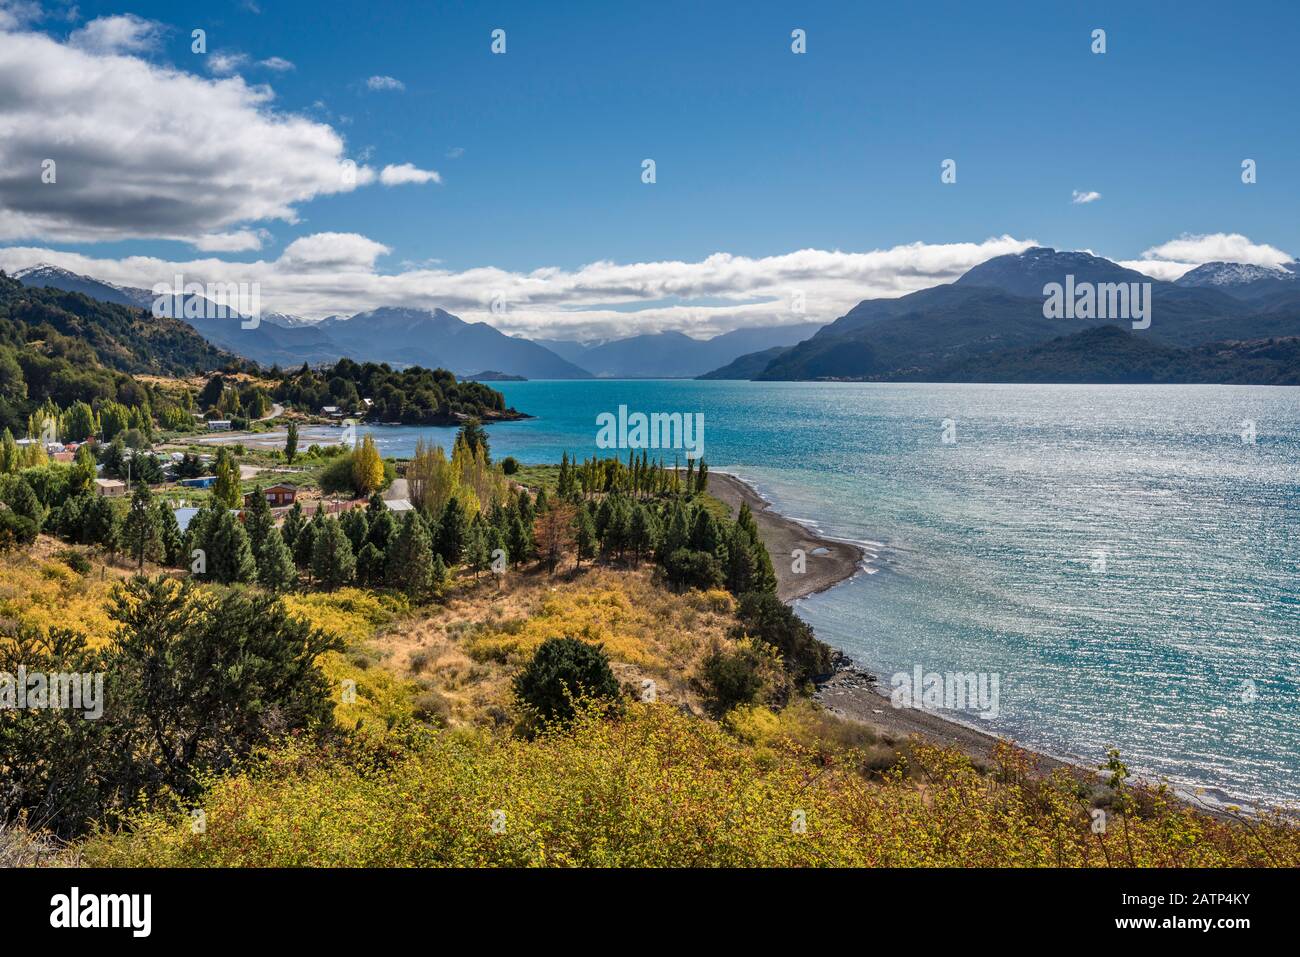 Village of Puerto Rio Tranquilo at Lago General Carrera near Marble Caves, Carretera Austral highway, Aysen Region, Patagonia, Chile Stock Photo